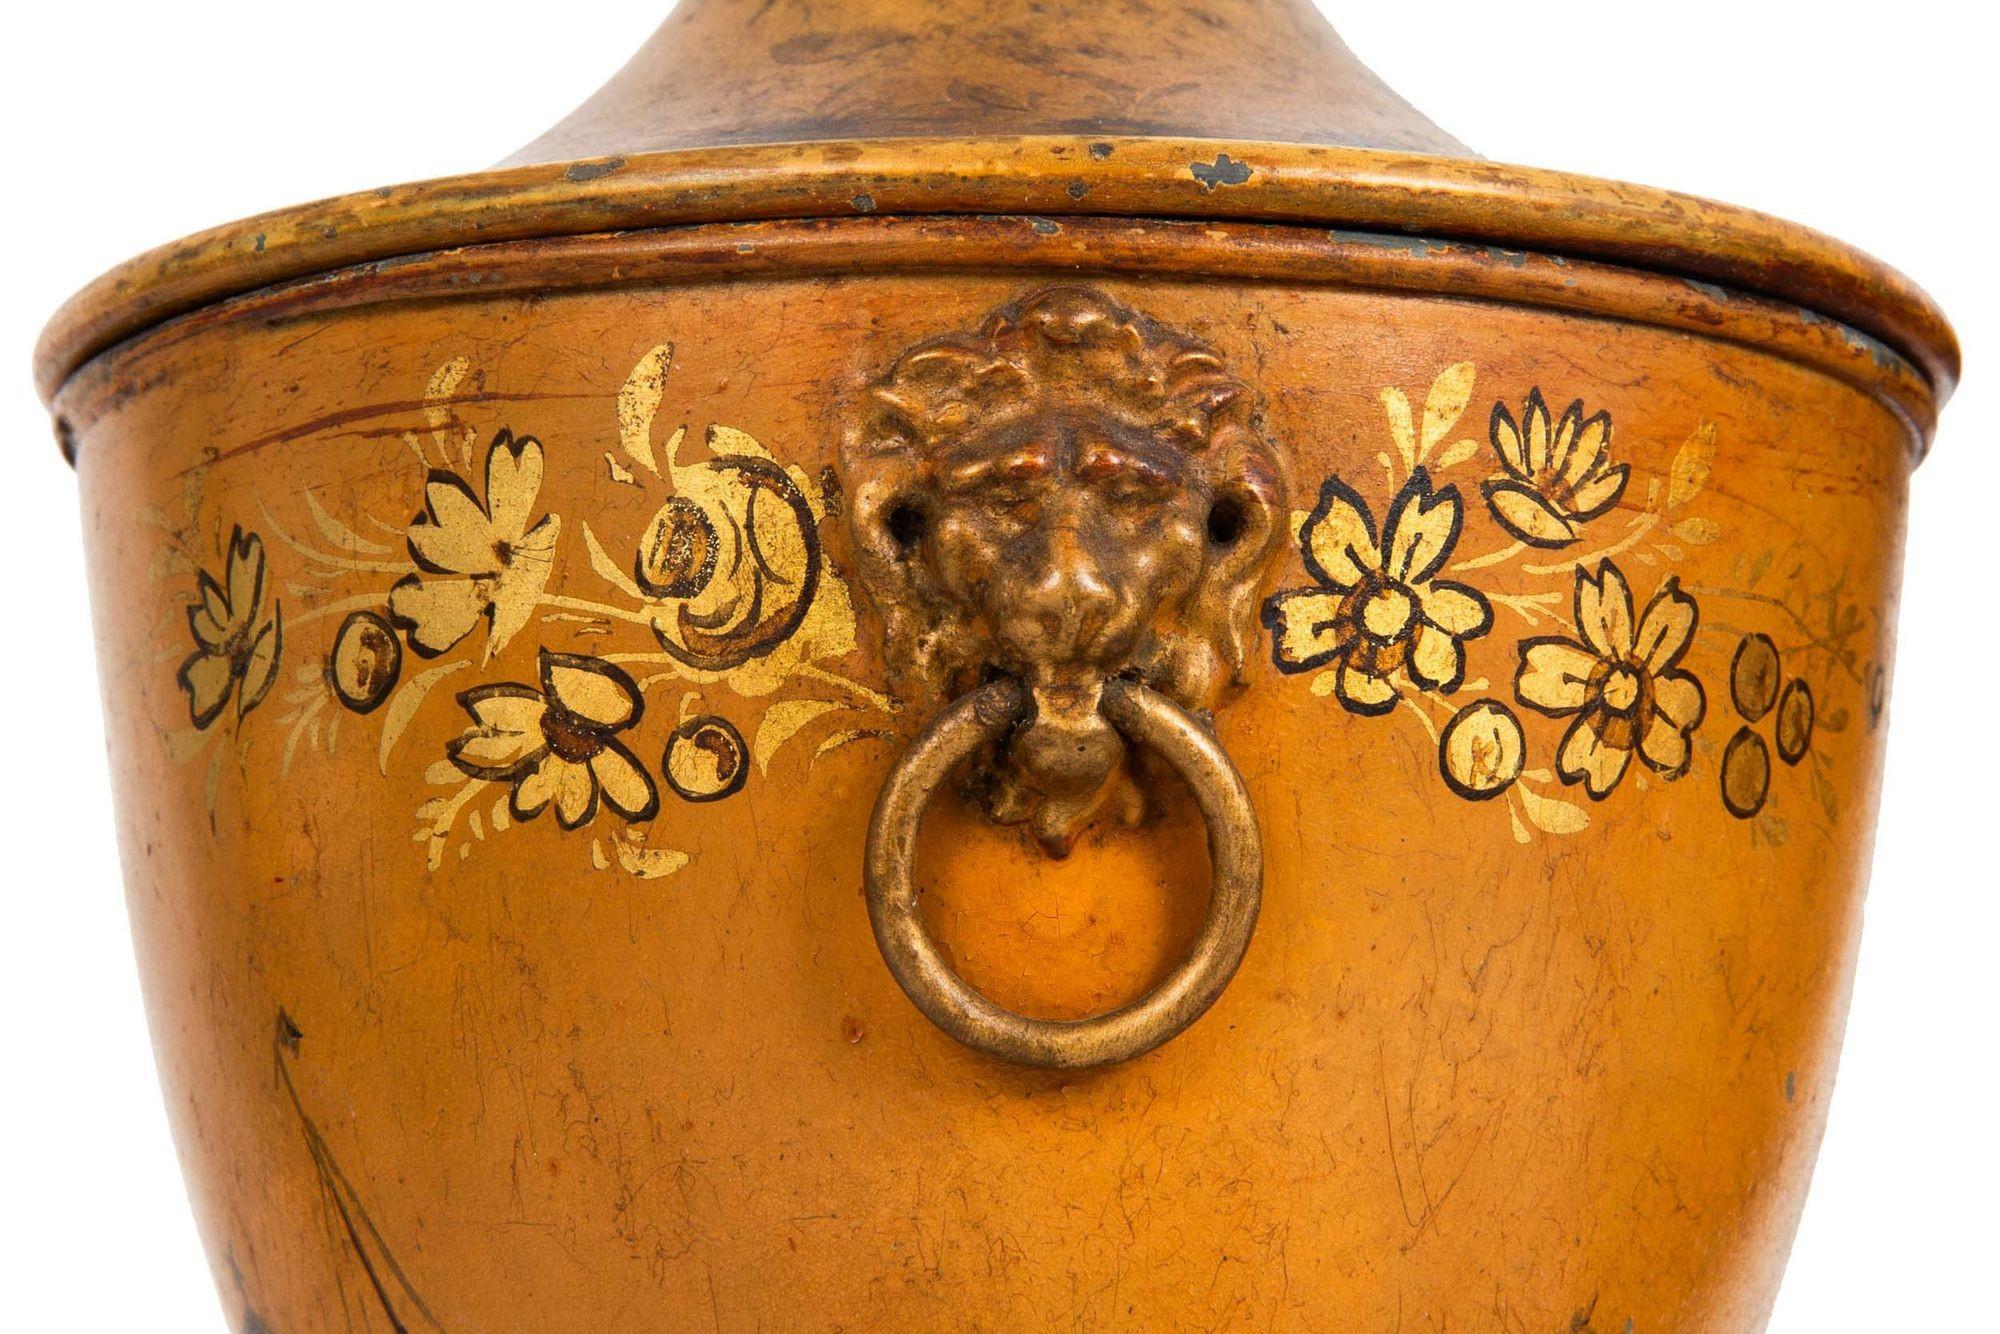 Fine 19th Century Near-Pair of Regency Tole-Painted Chestnut Urns For Sale 11